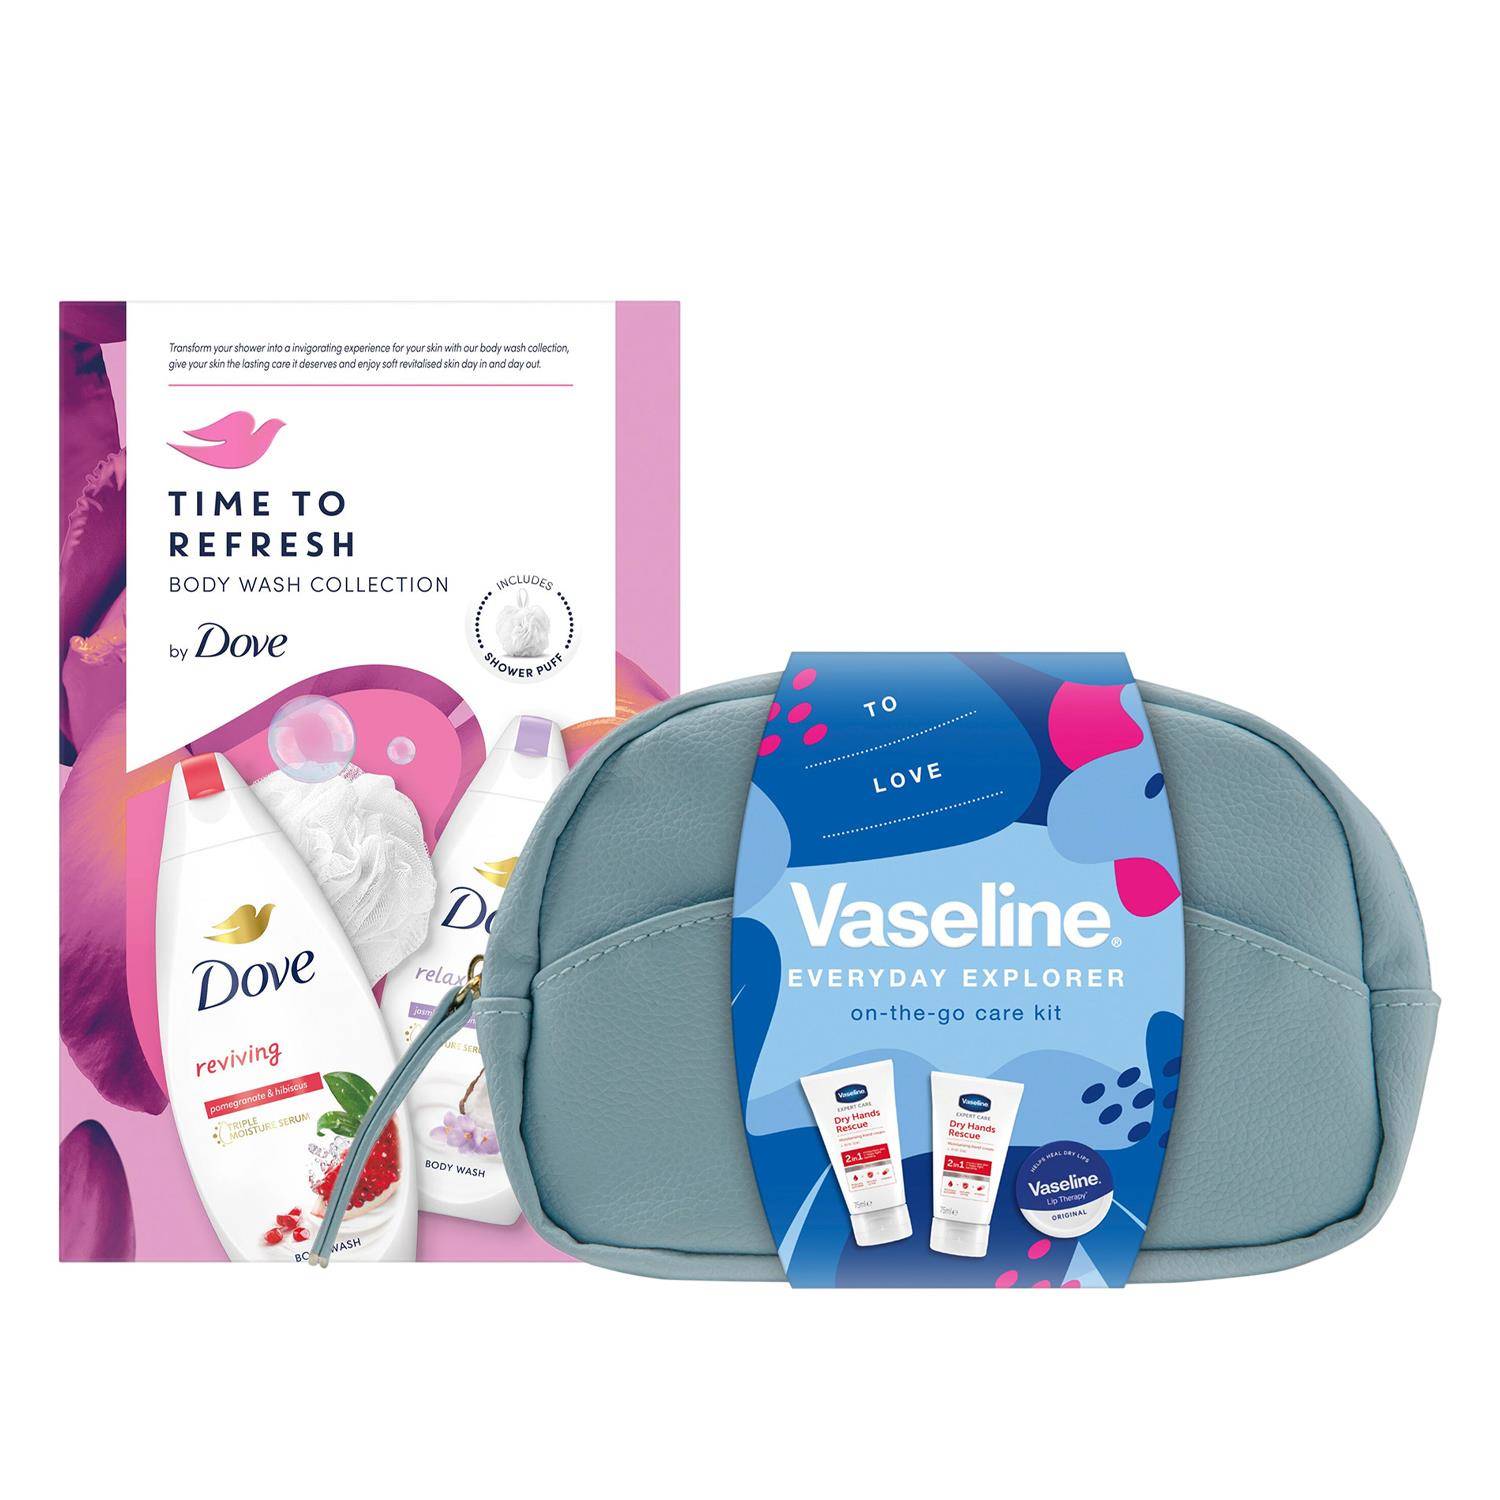 Vaseline Everyday Explorer and Dove Time To Refresh Body Wash Gift Set for Her